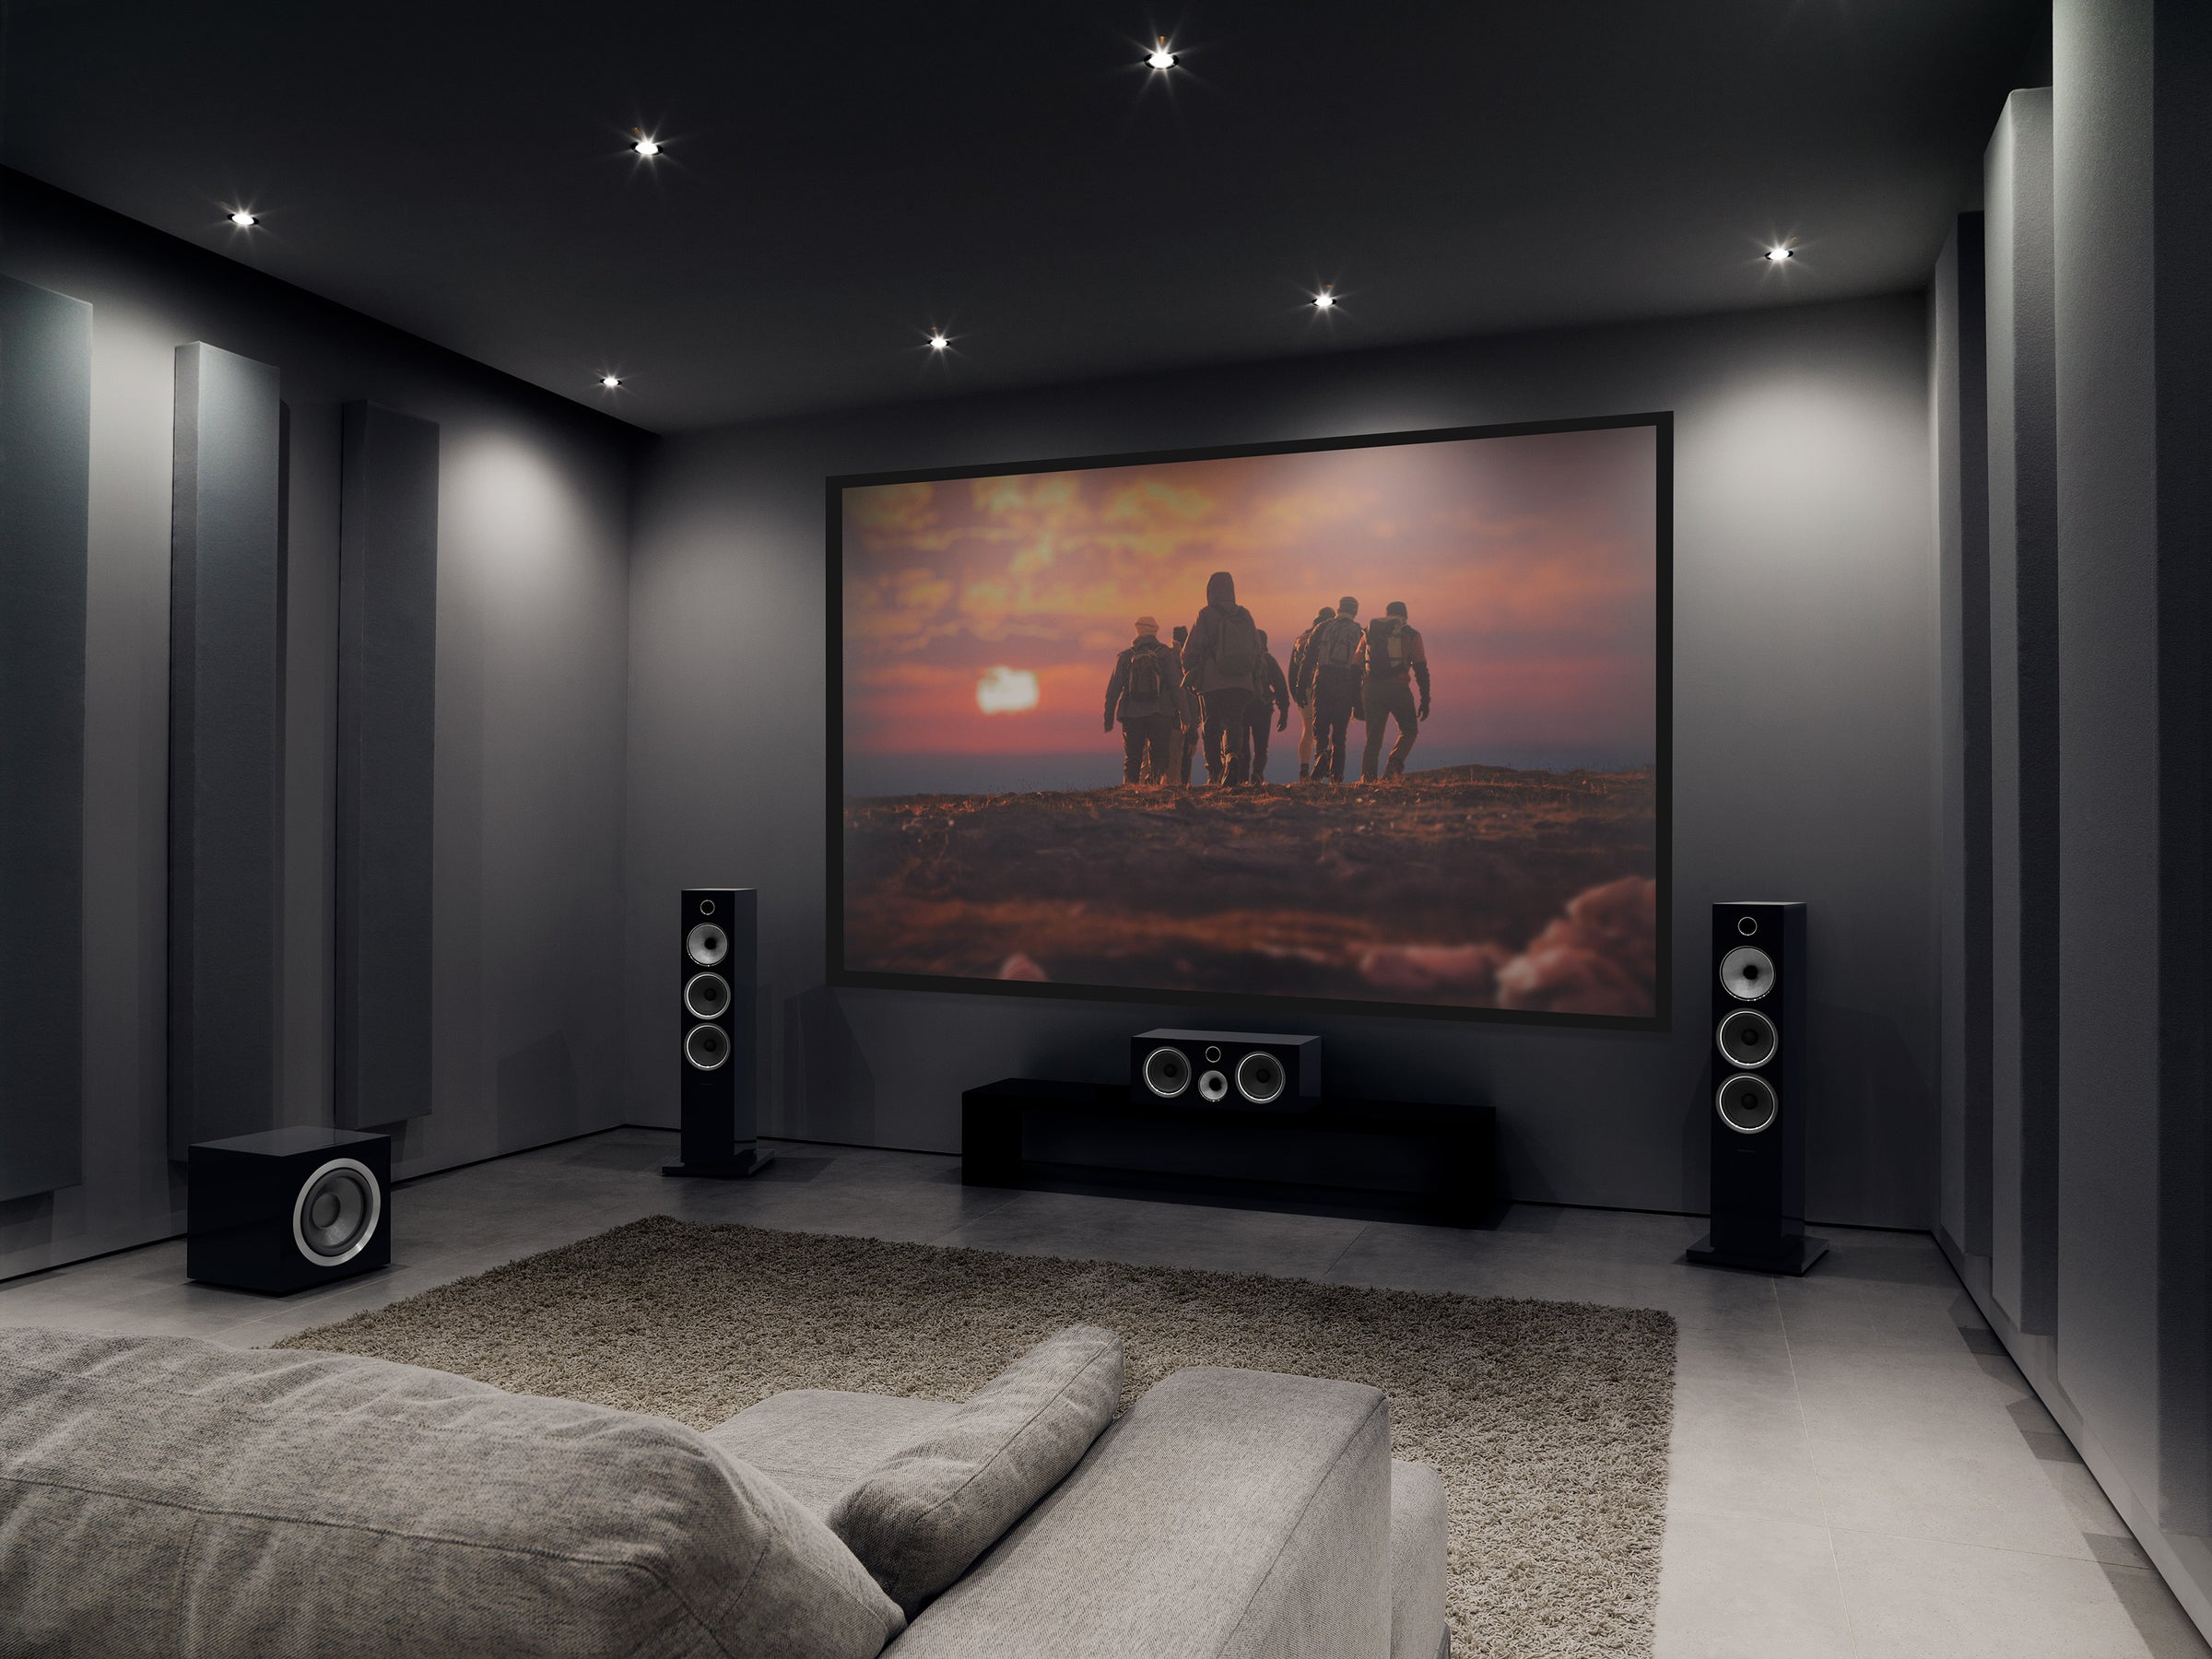 A home theatre audio system setup featuring a projector, floor standing speakers and centre speaker complete with a couch and rug in the foreground